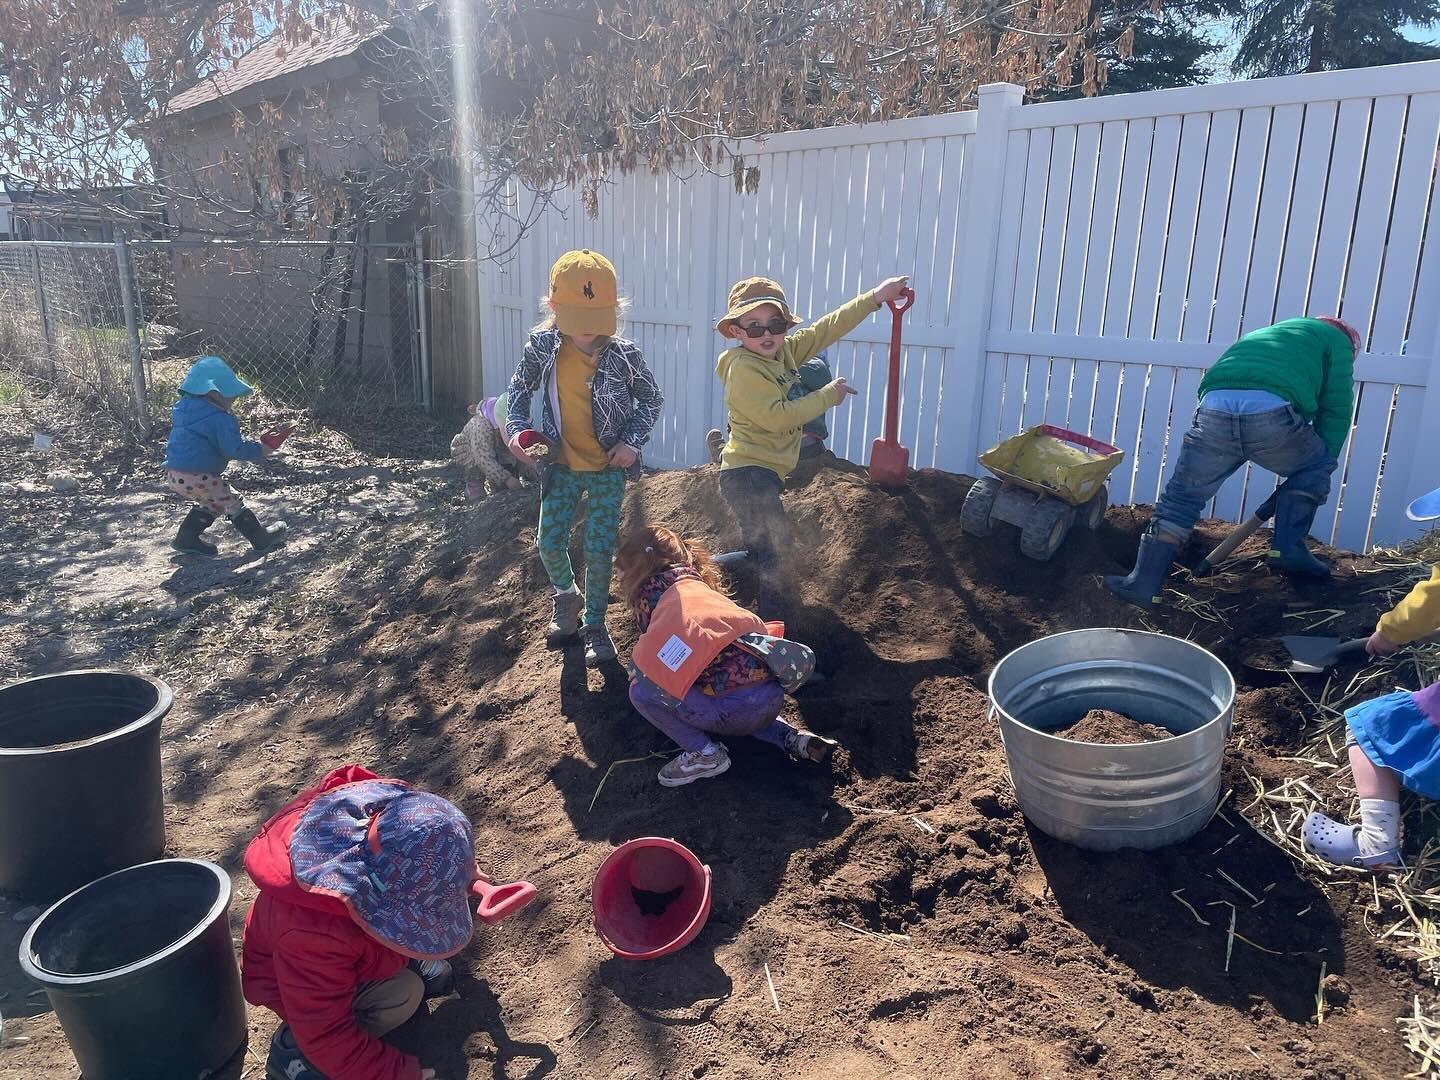 Happy Earth Day! We spent part of our Earth Day moving compost into our garden beds. Studies show that playing in dirt can improve moods, reduce anxiety, improve immune systems, improve confidence, boost creativity and offer a well rounded sensory ex